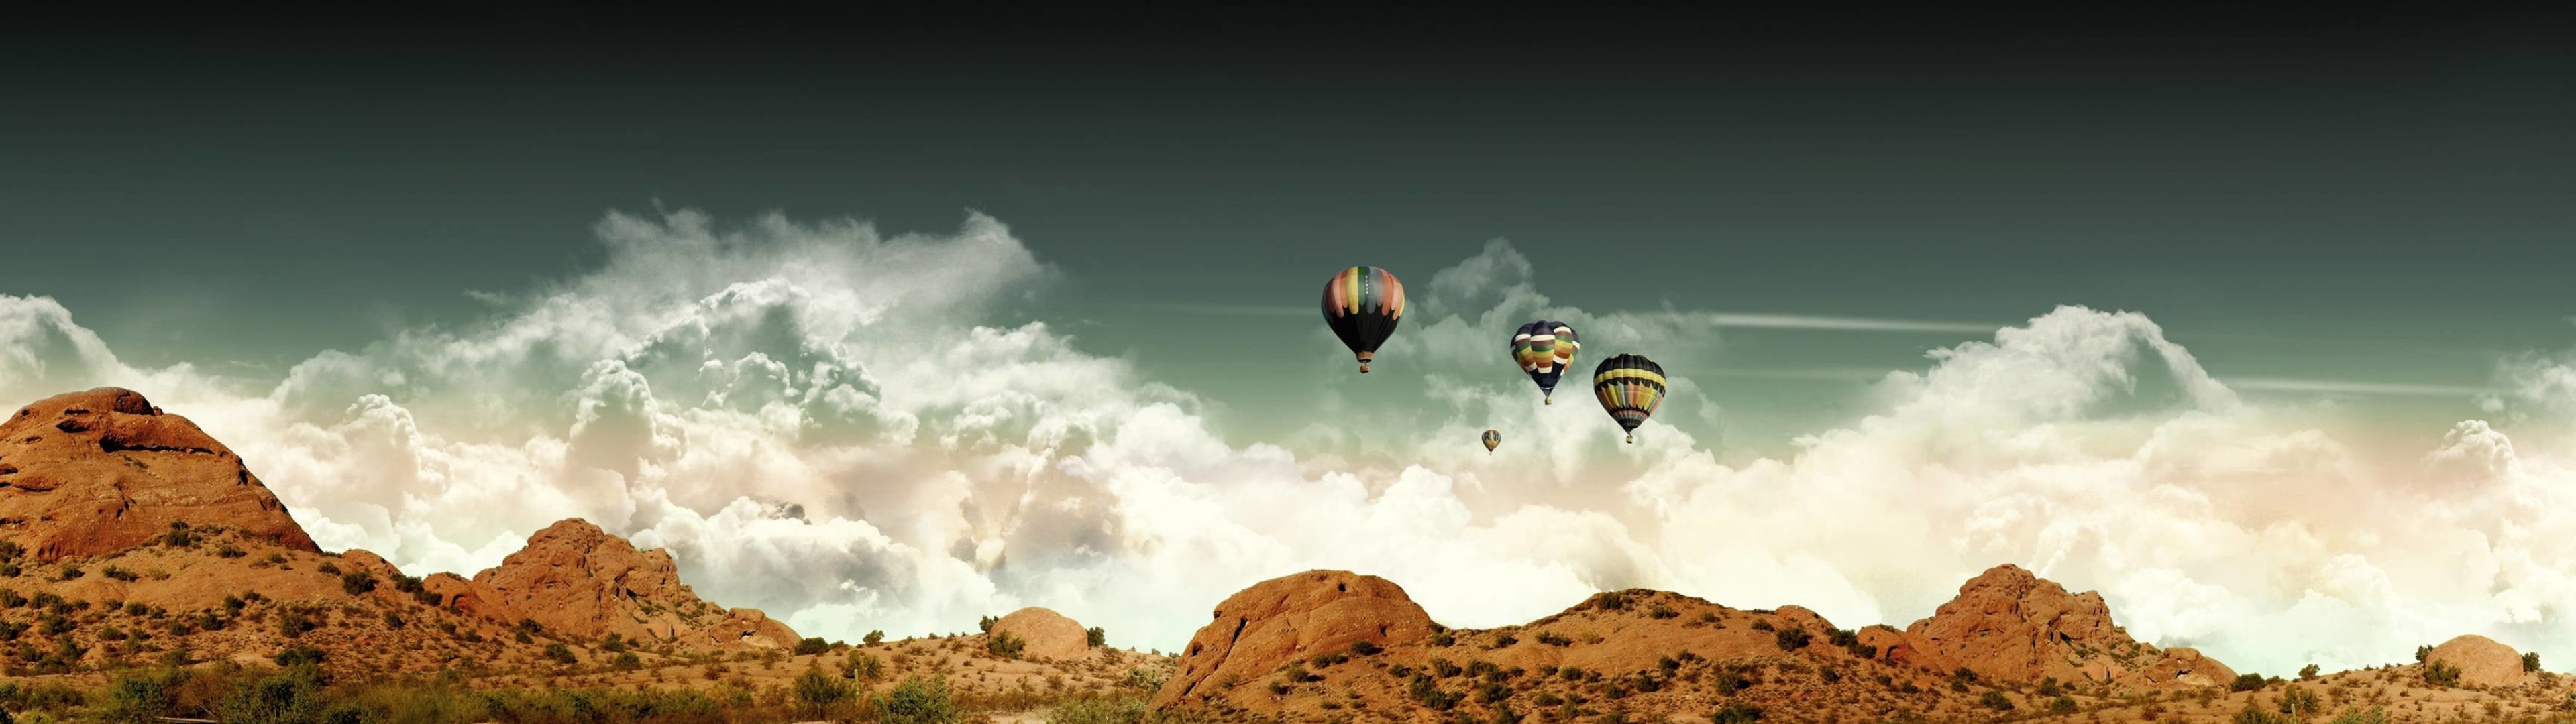 Hot Air Balloon: The First Successful Human-Carrying Flight Technology, Ballooning. 3840x1080 Dual Screen Background.